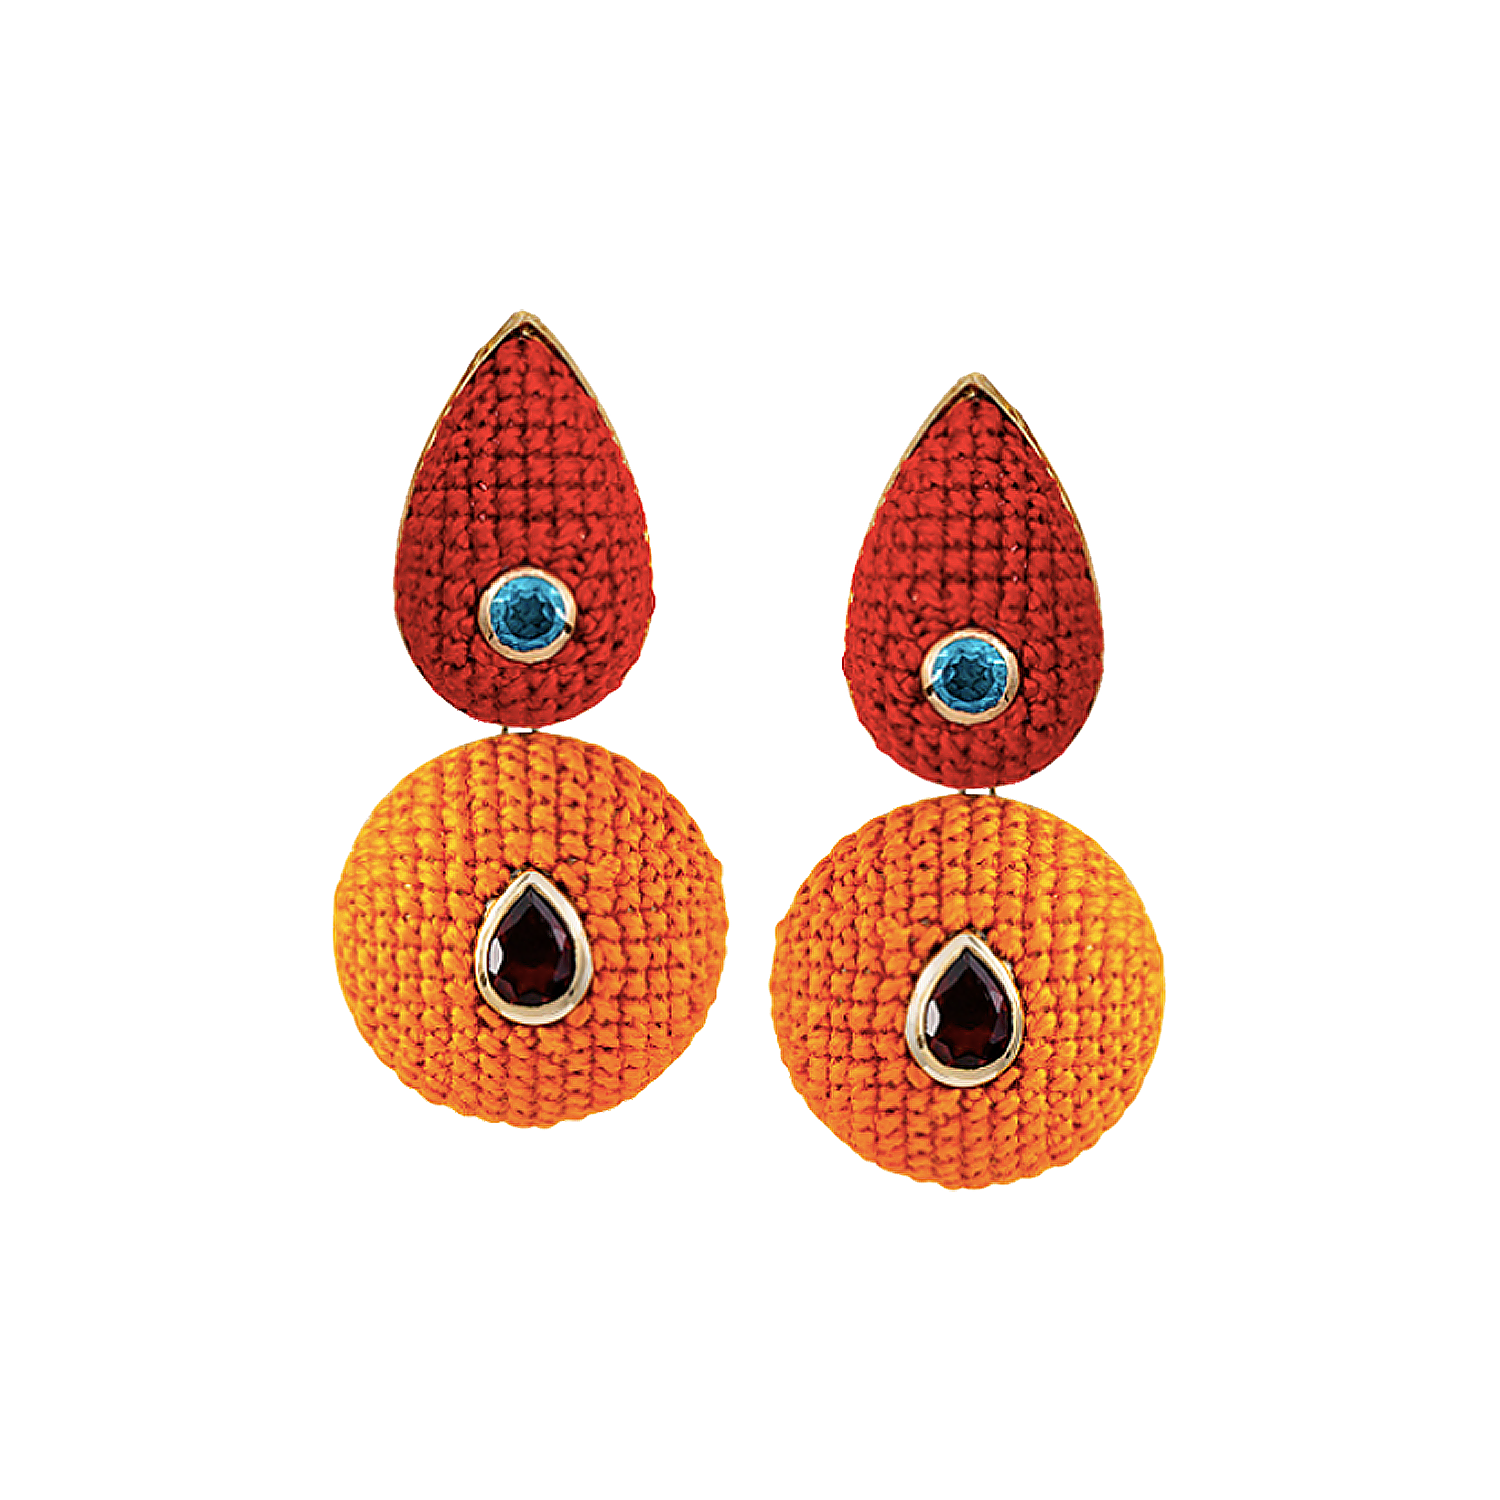 Orange and Red Double Drop Earrings